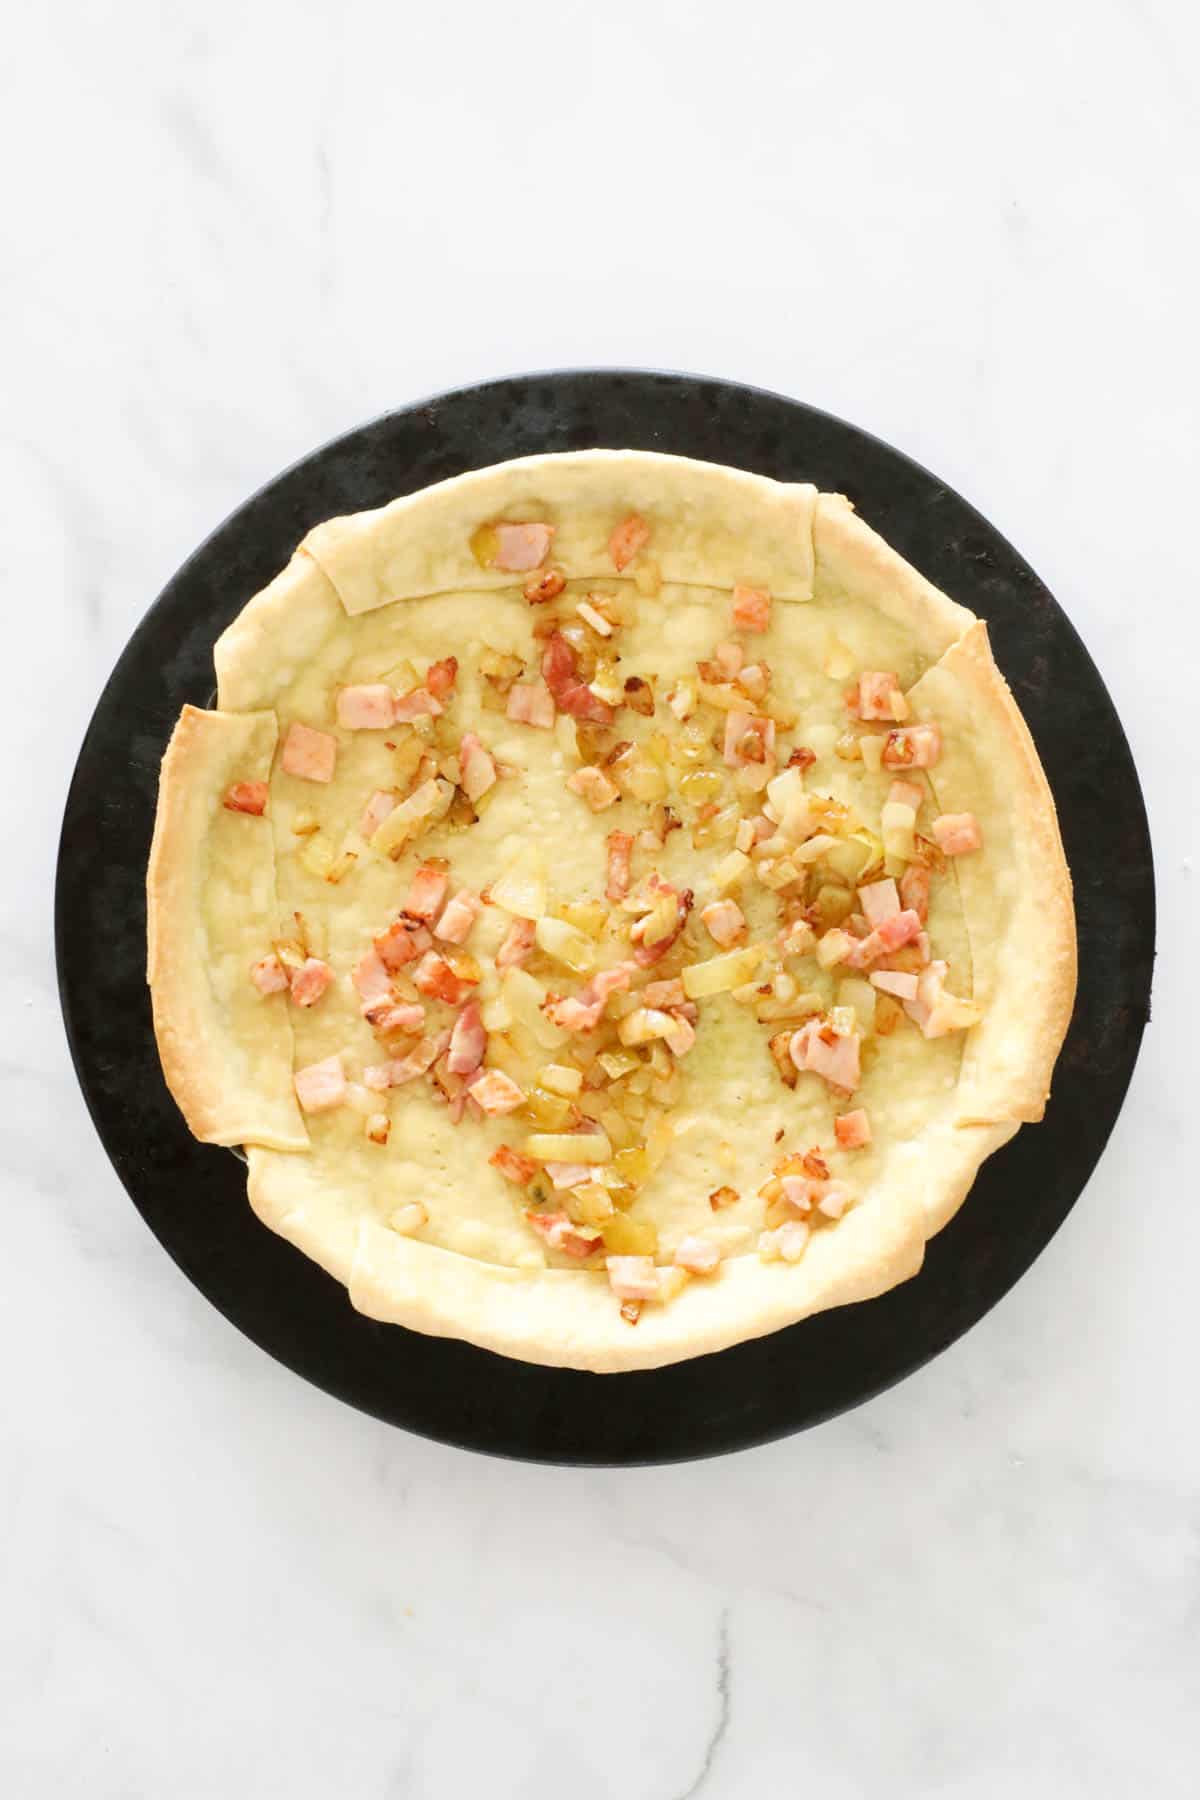 Crust with sauteed bacon and onion sprinkled over the base.